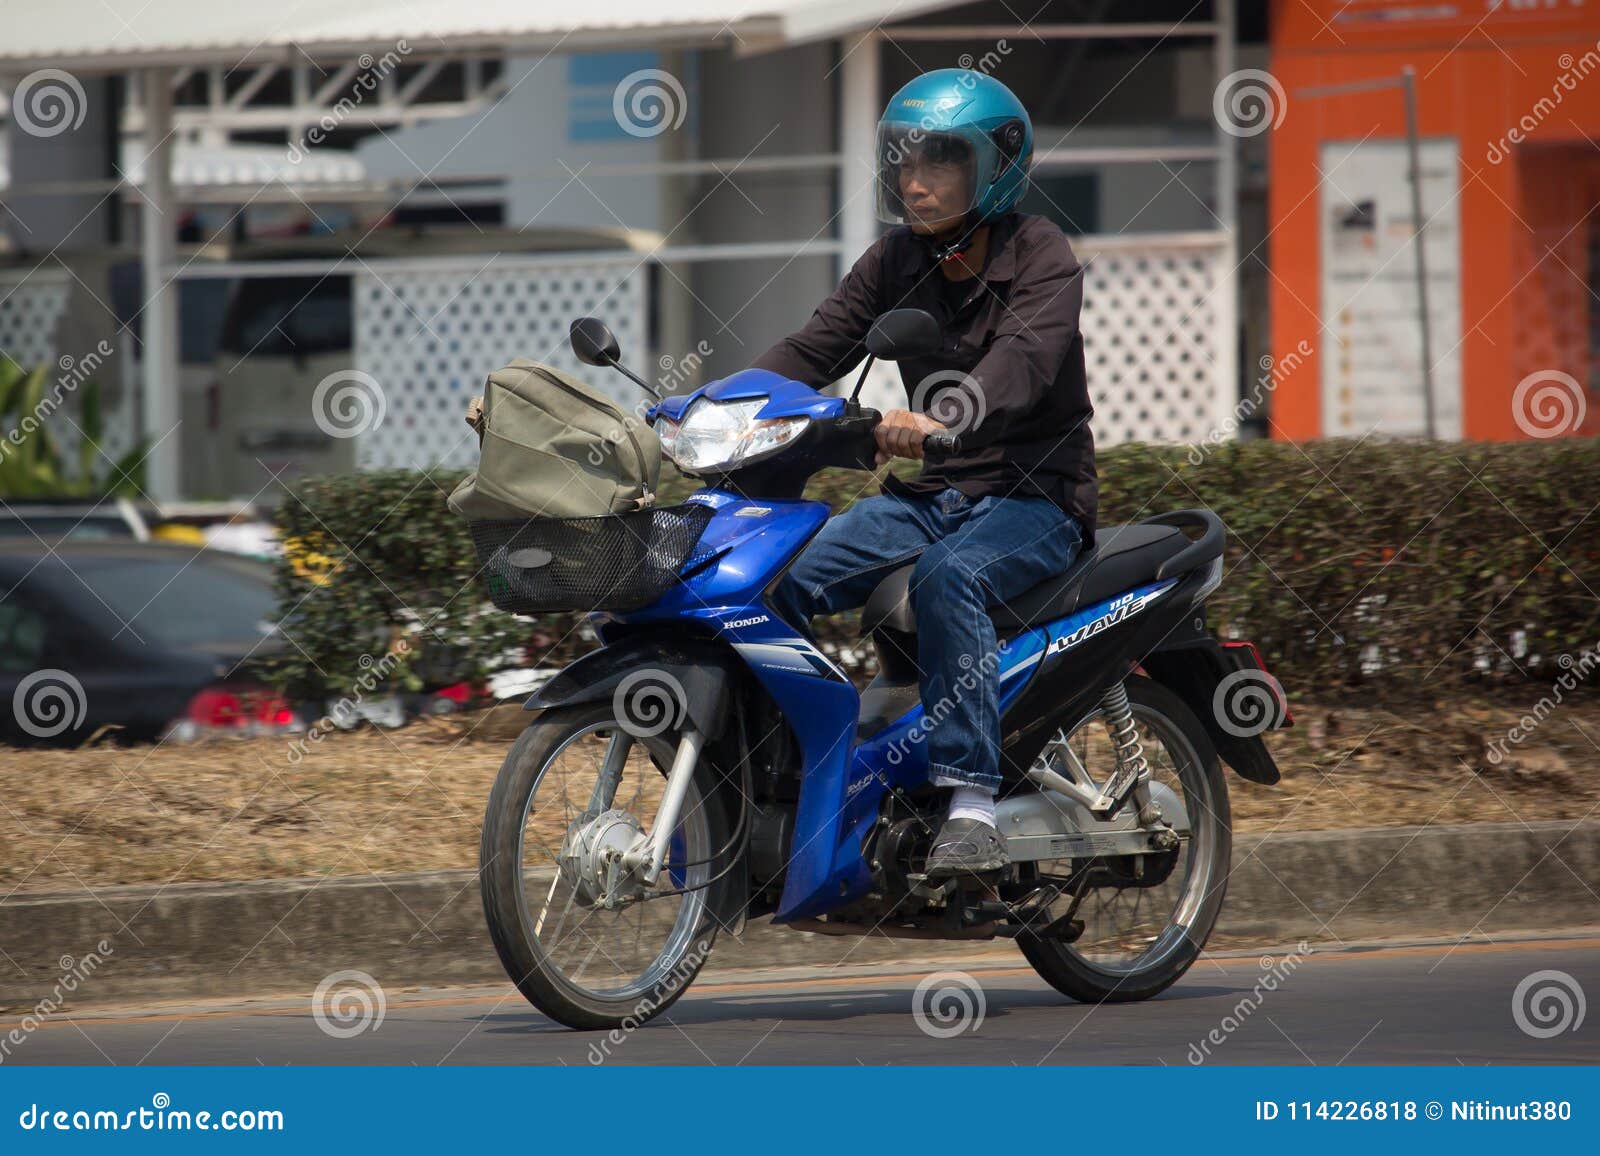 Private Honda Wave Motorcycle. Editorial Stock Photo - Image of ...